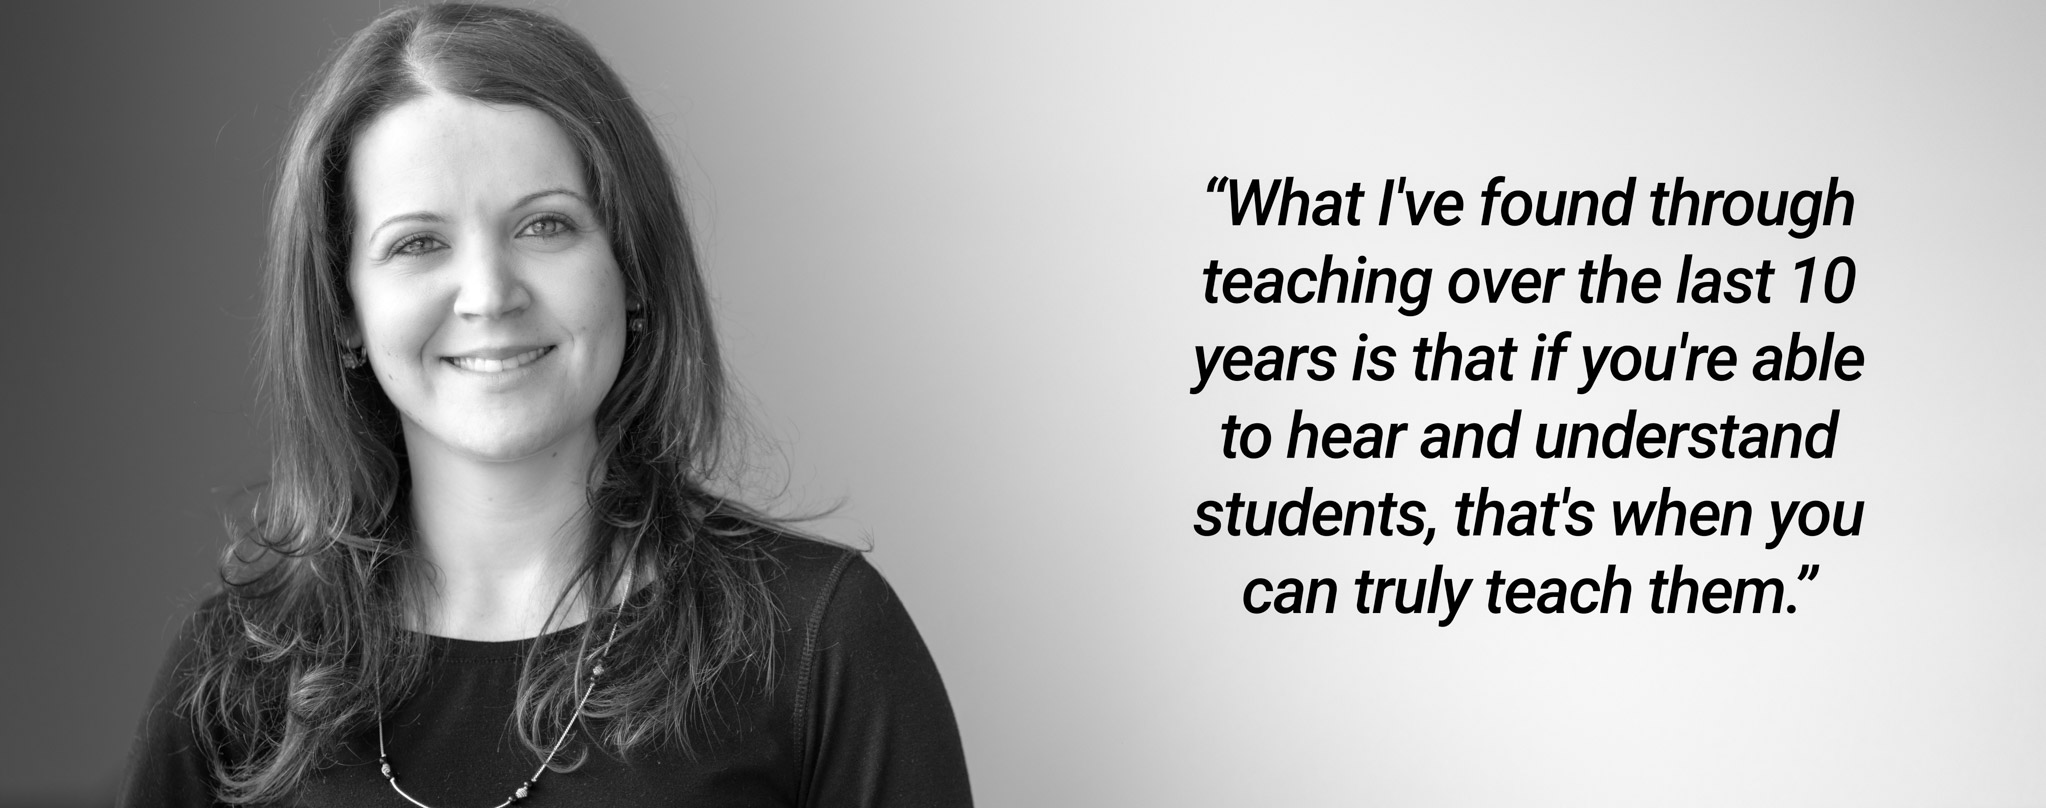 Text that reads: “What I've found through teaching over the last 10 years is that if you're able to hear and understand students, that's when you can truly teach them.”